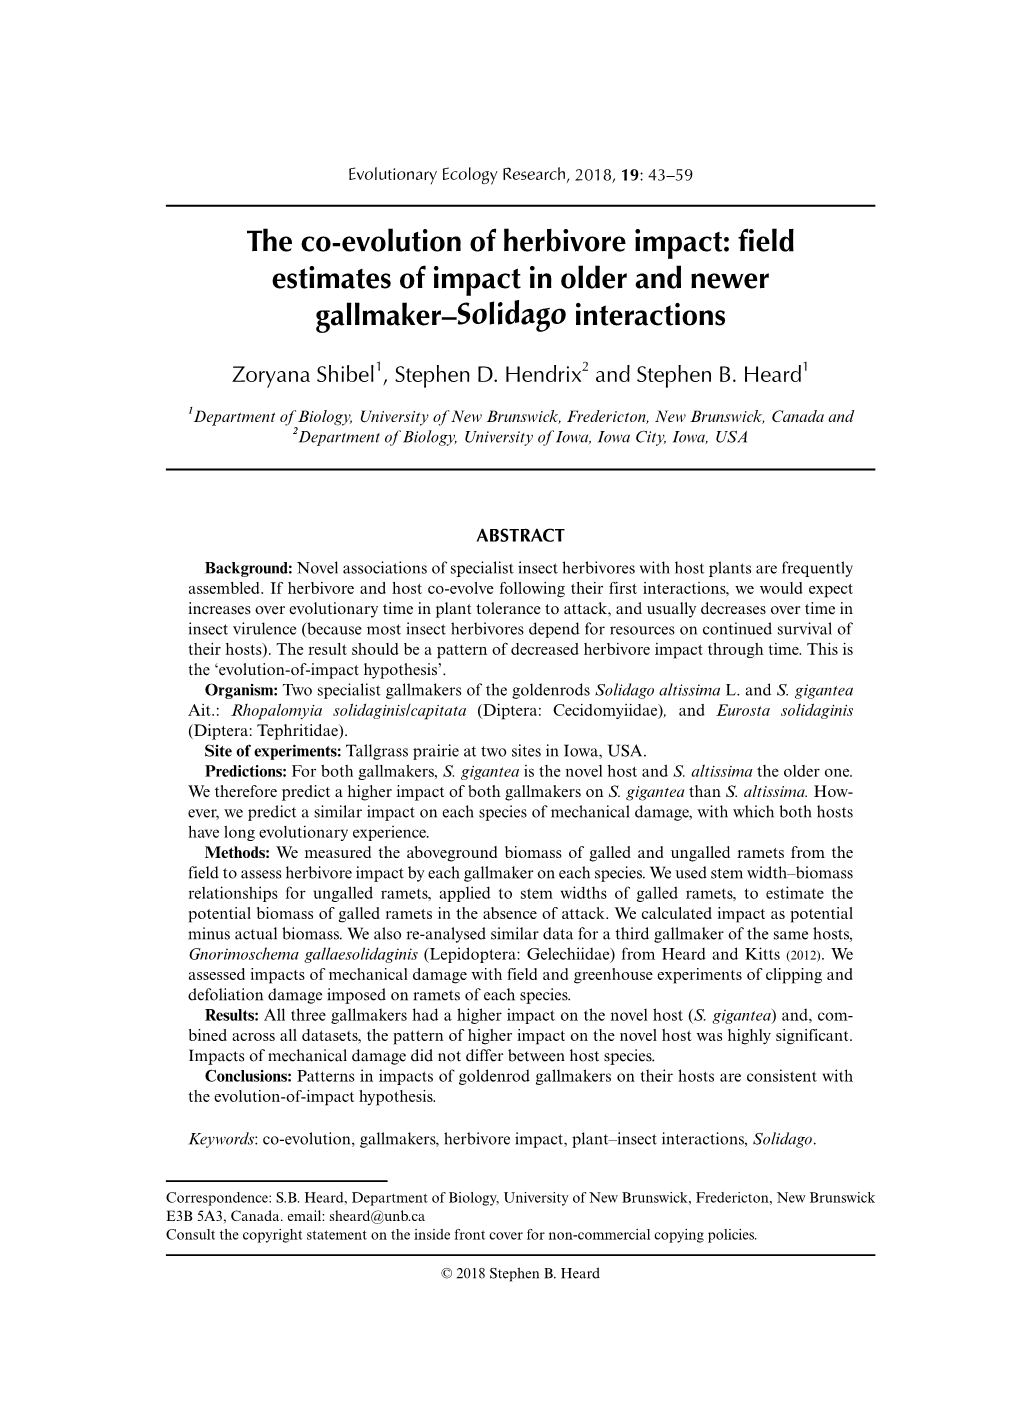 The Co-Evolution of Herbivore Impact: Field Estimates of Impact in Older and Newer Gallmaker–Solidago Interactions